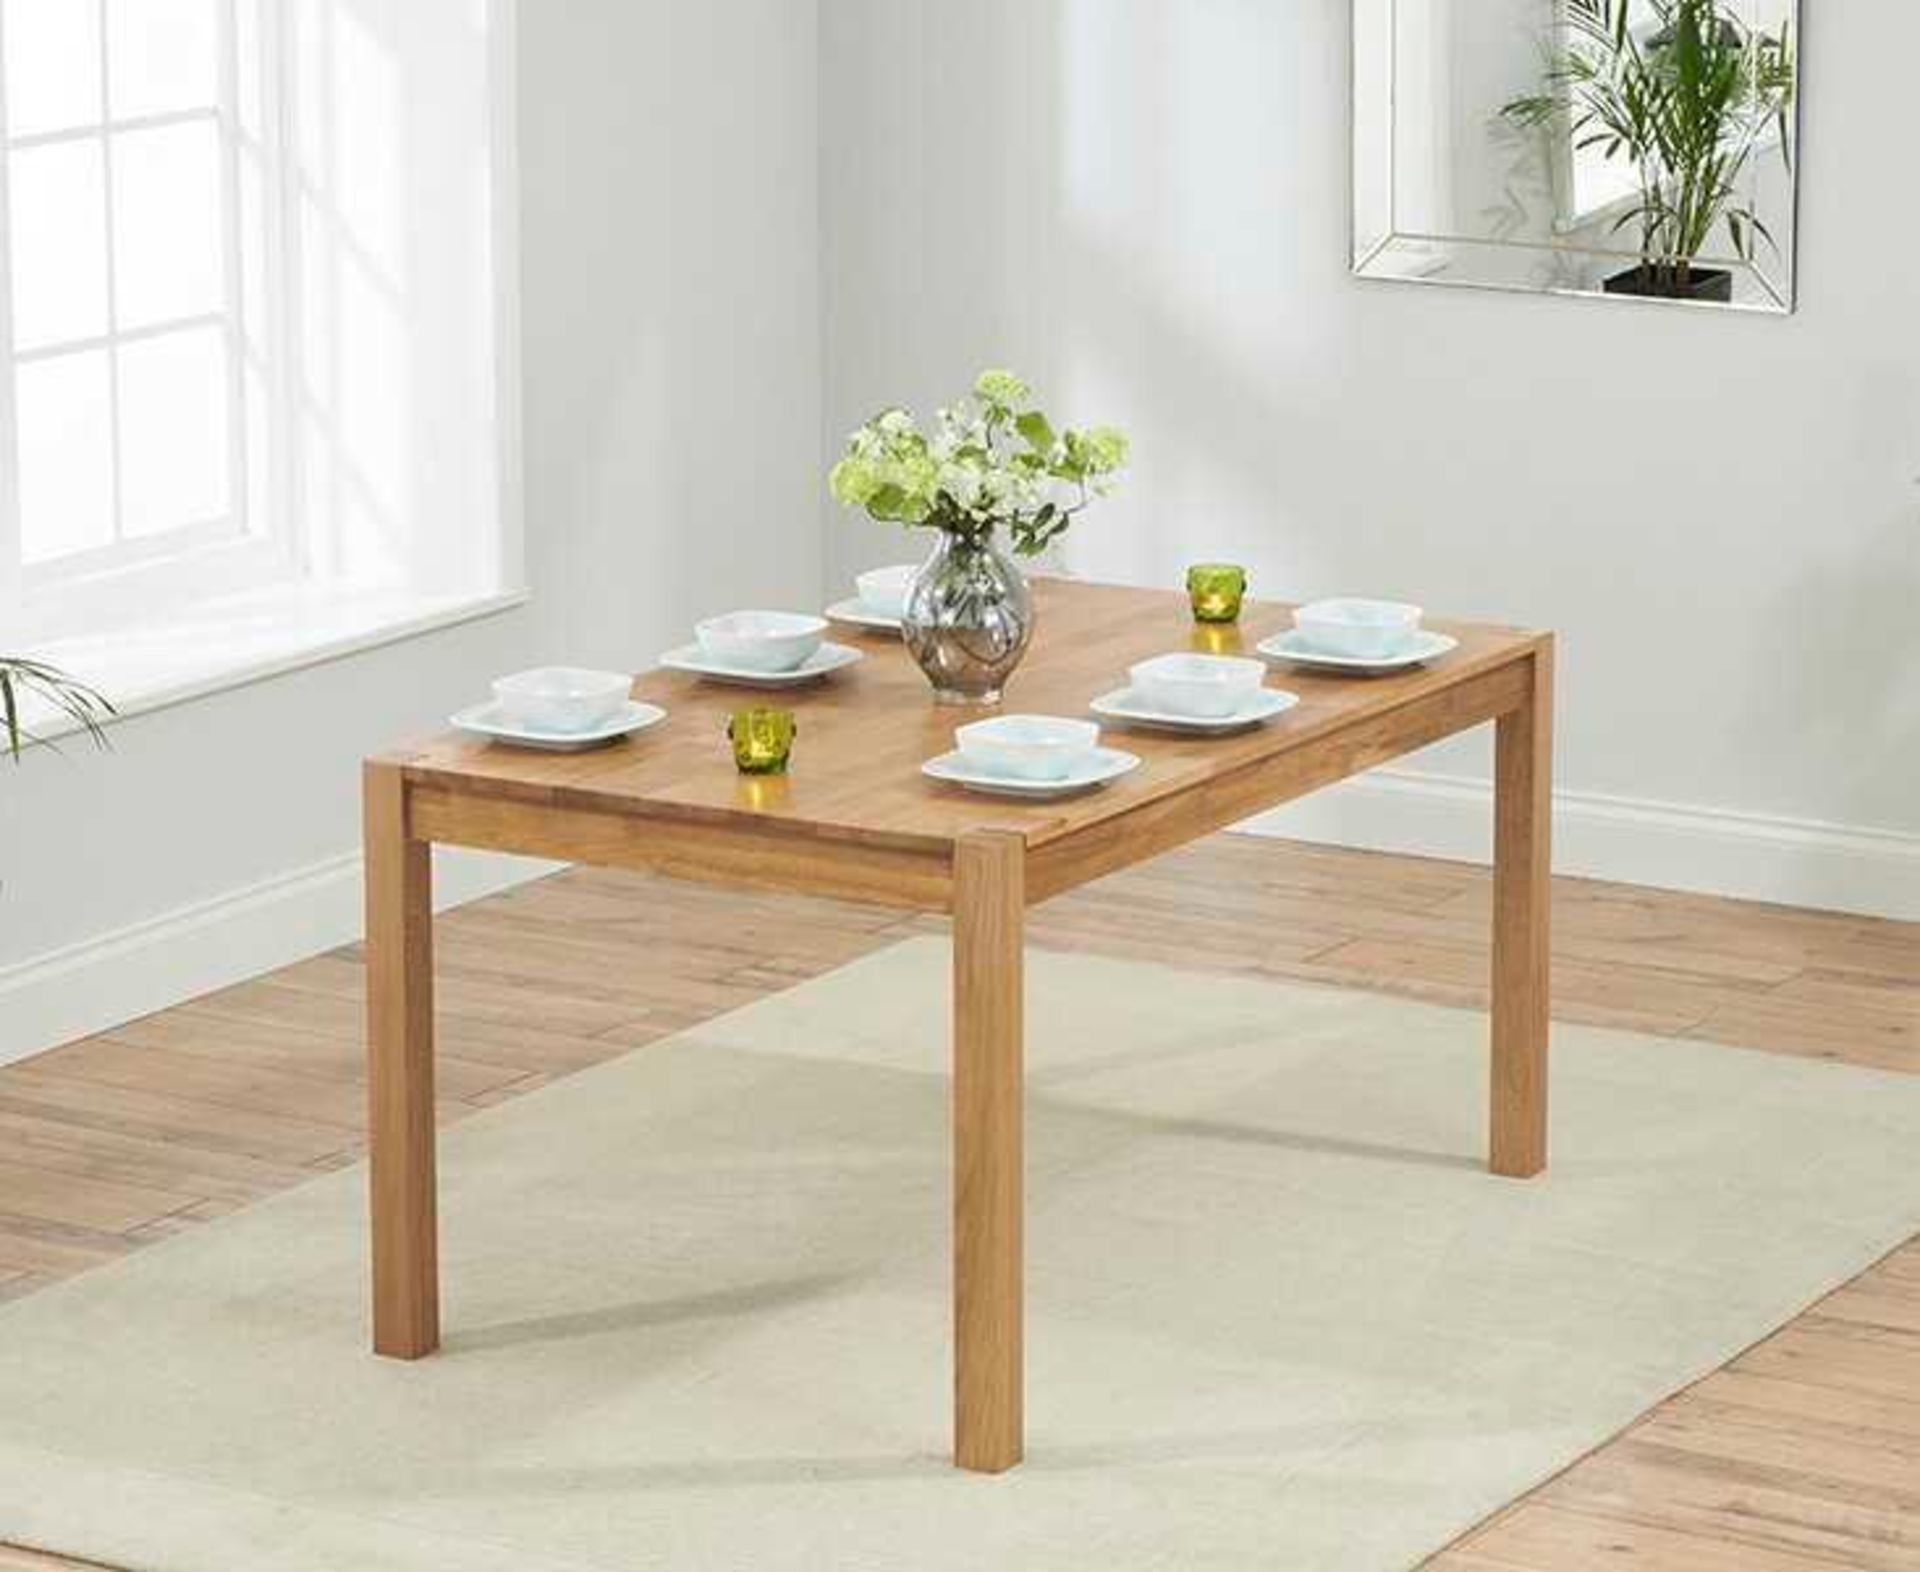 RRP £275 August Grove Rory Dining Table